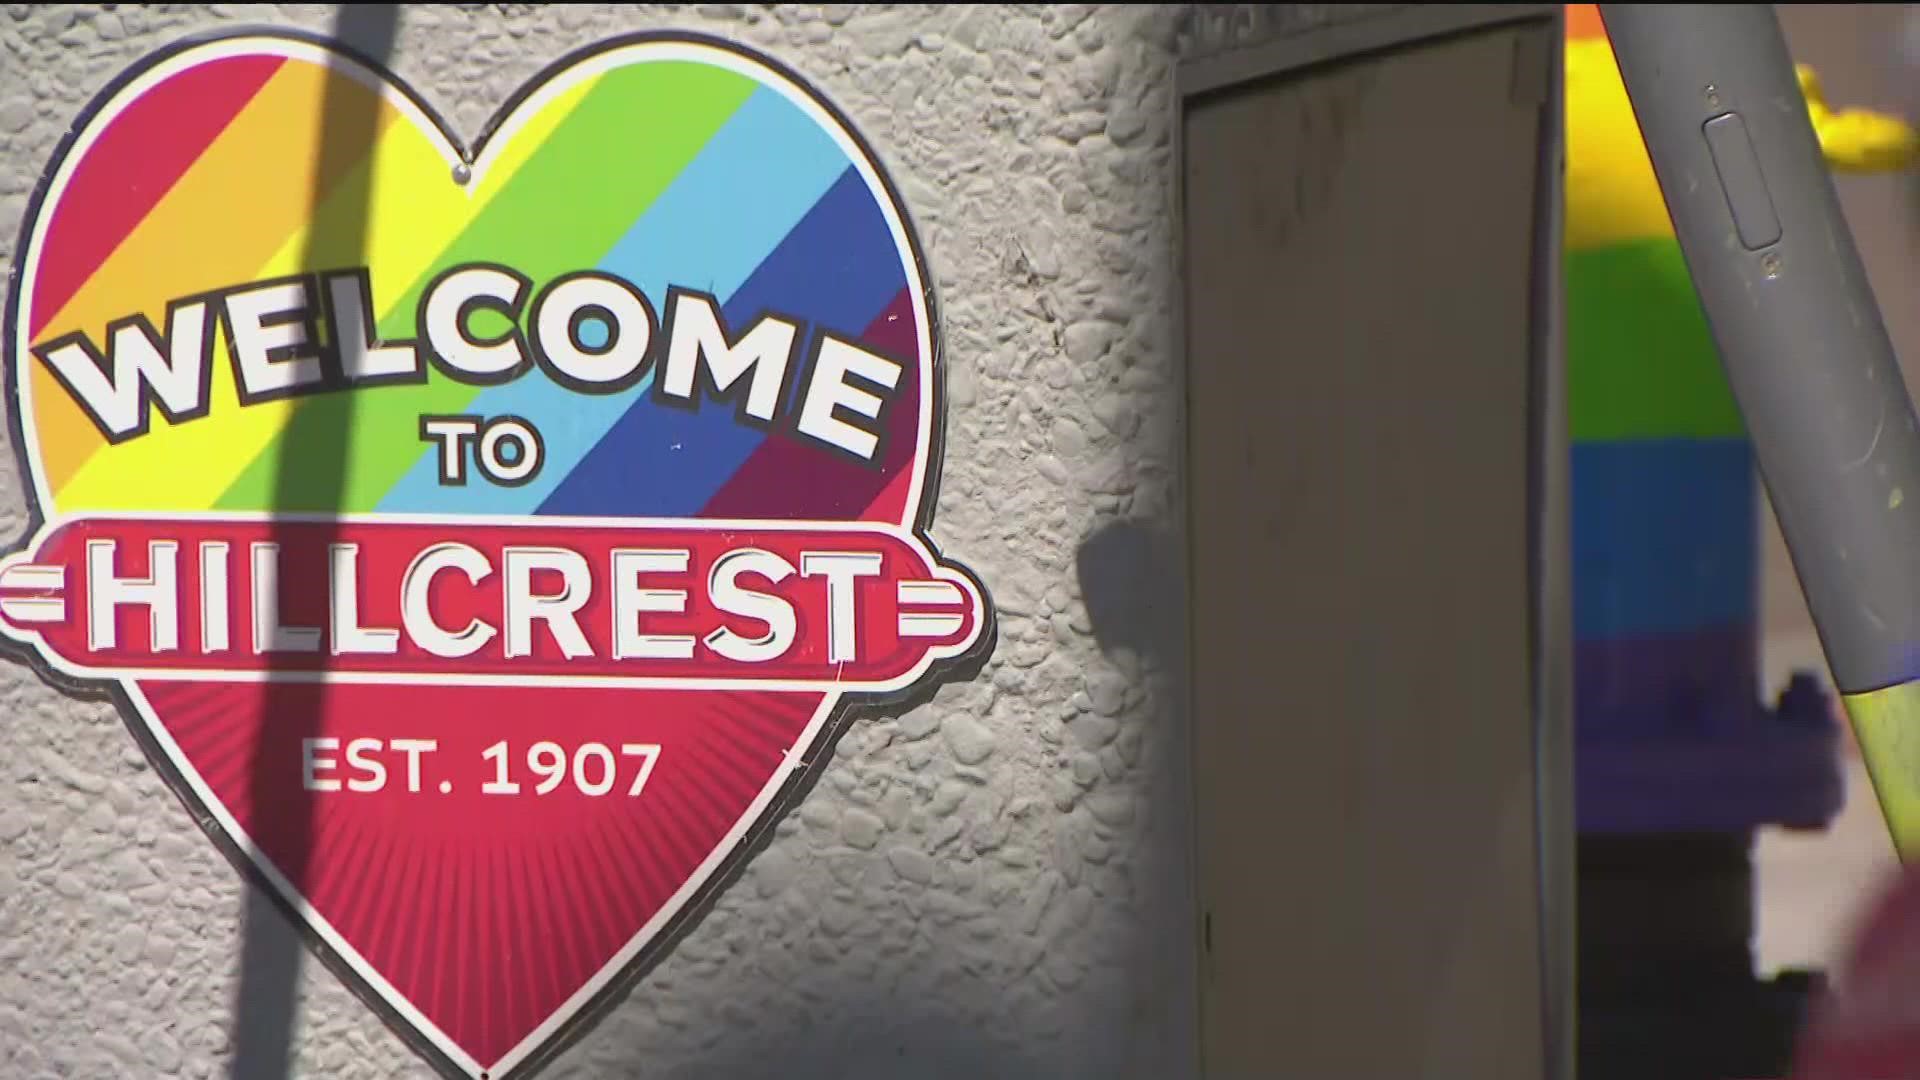 San Diego Pride Parade route showcases the best of Hillcrest, then and